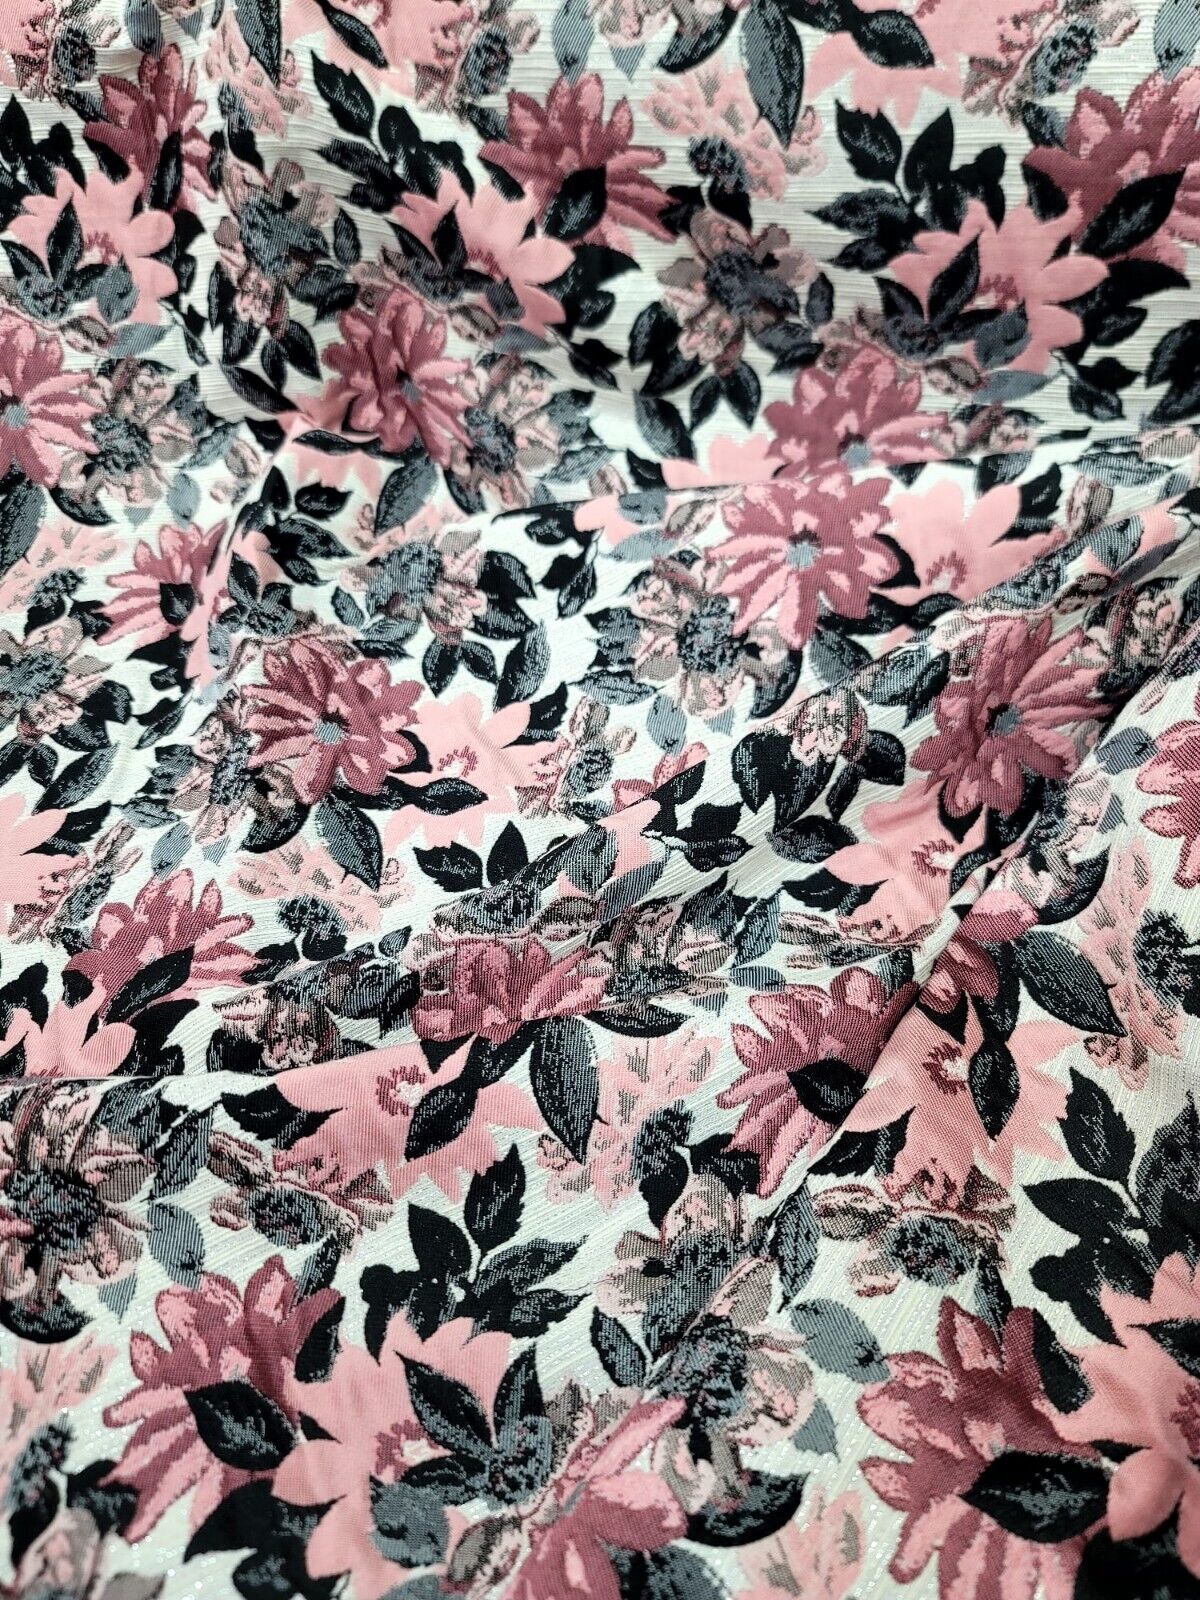 Dusty Rose Mauve Floral Chenille Upholstery Brocade Fabric - 56" Width - Sold by the Yard - Perfect for Pillows, Cushions, and Home Decor